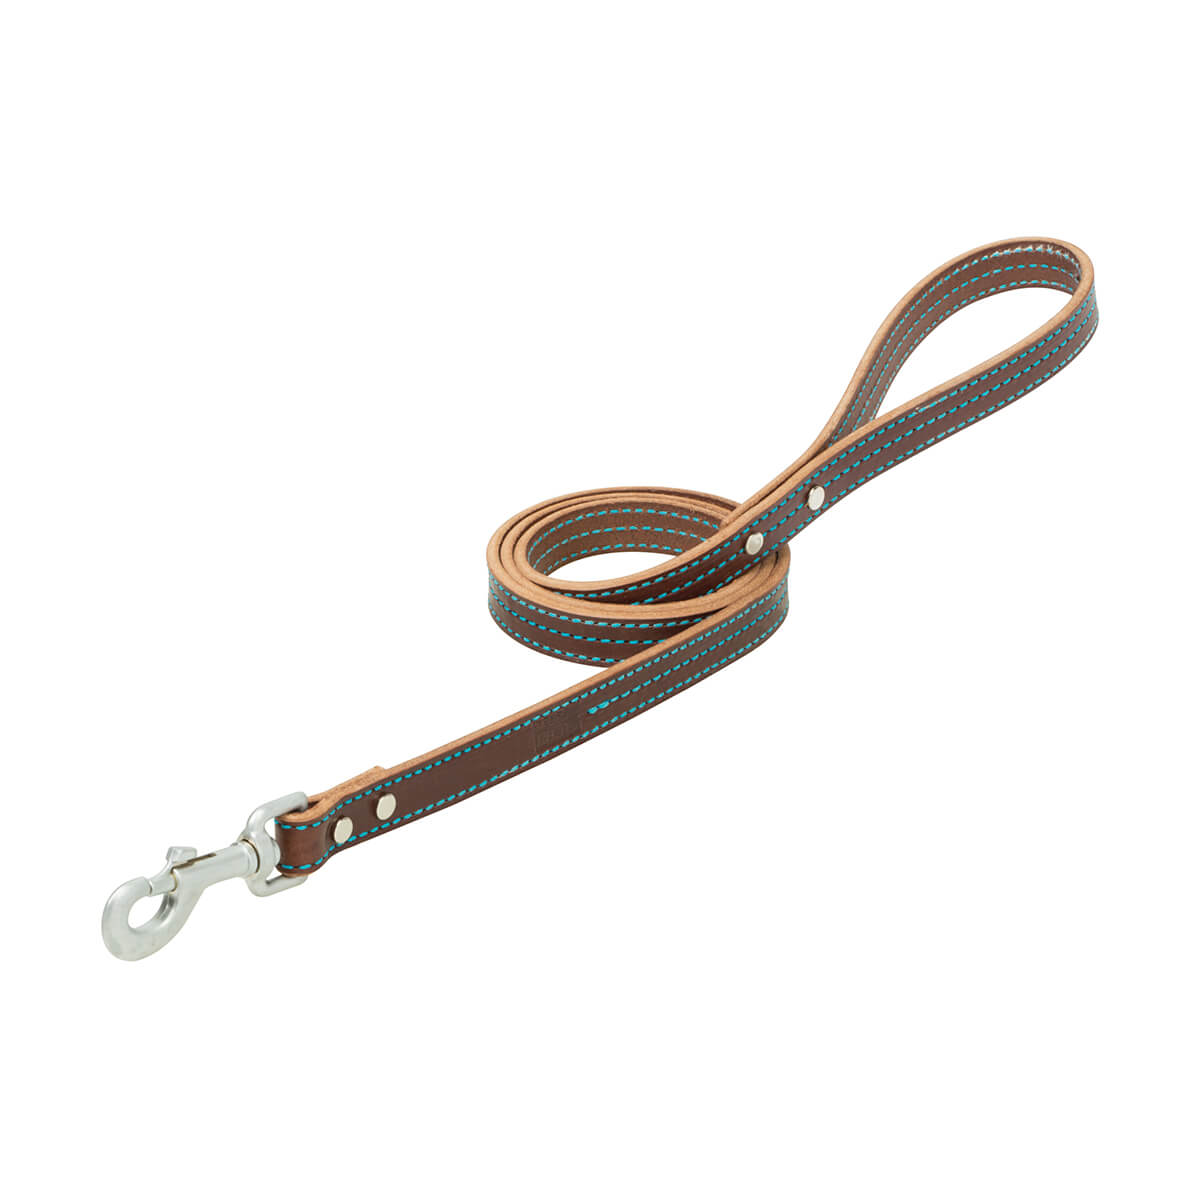 Terrain D.O.G.® Bridle Leather Dog Leash - 3/4-in x 4-ft